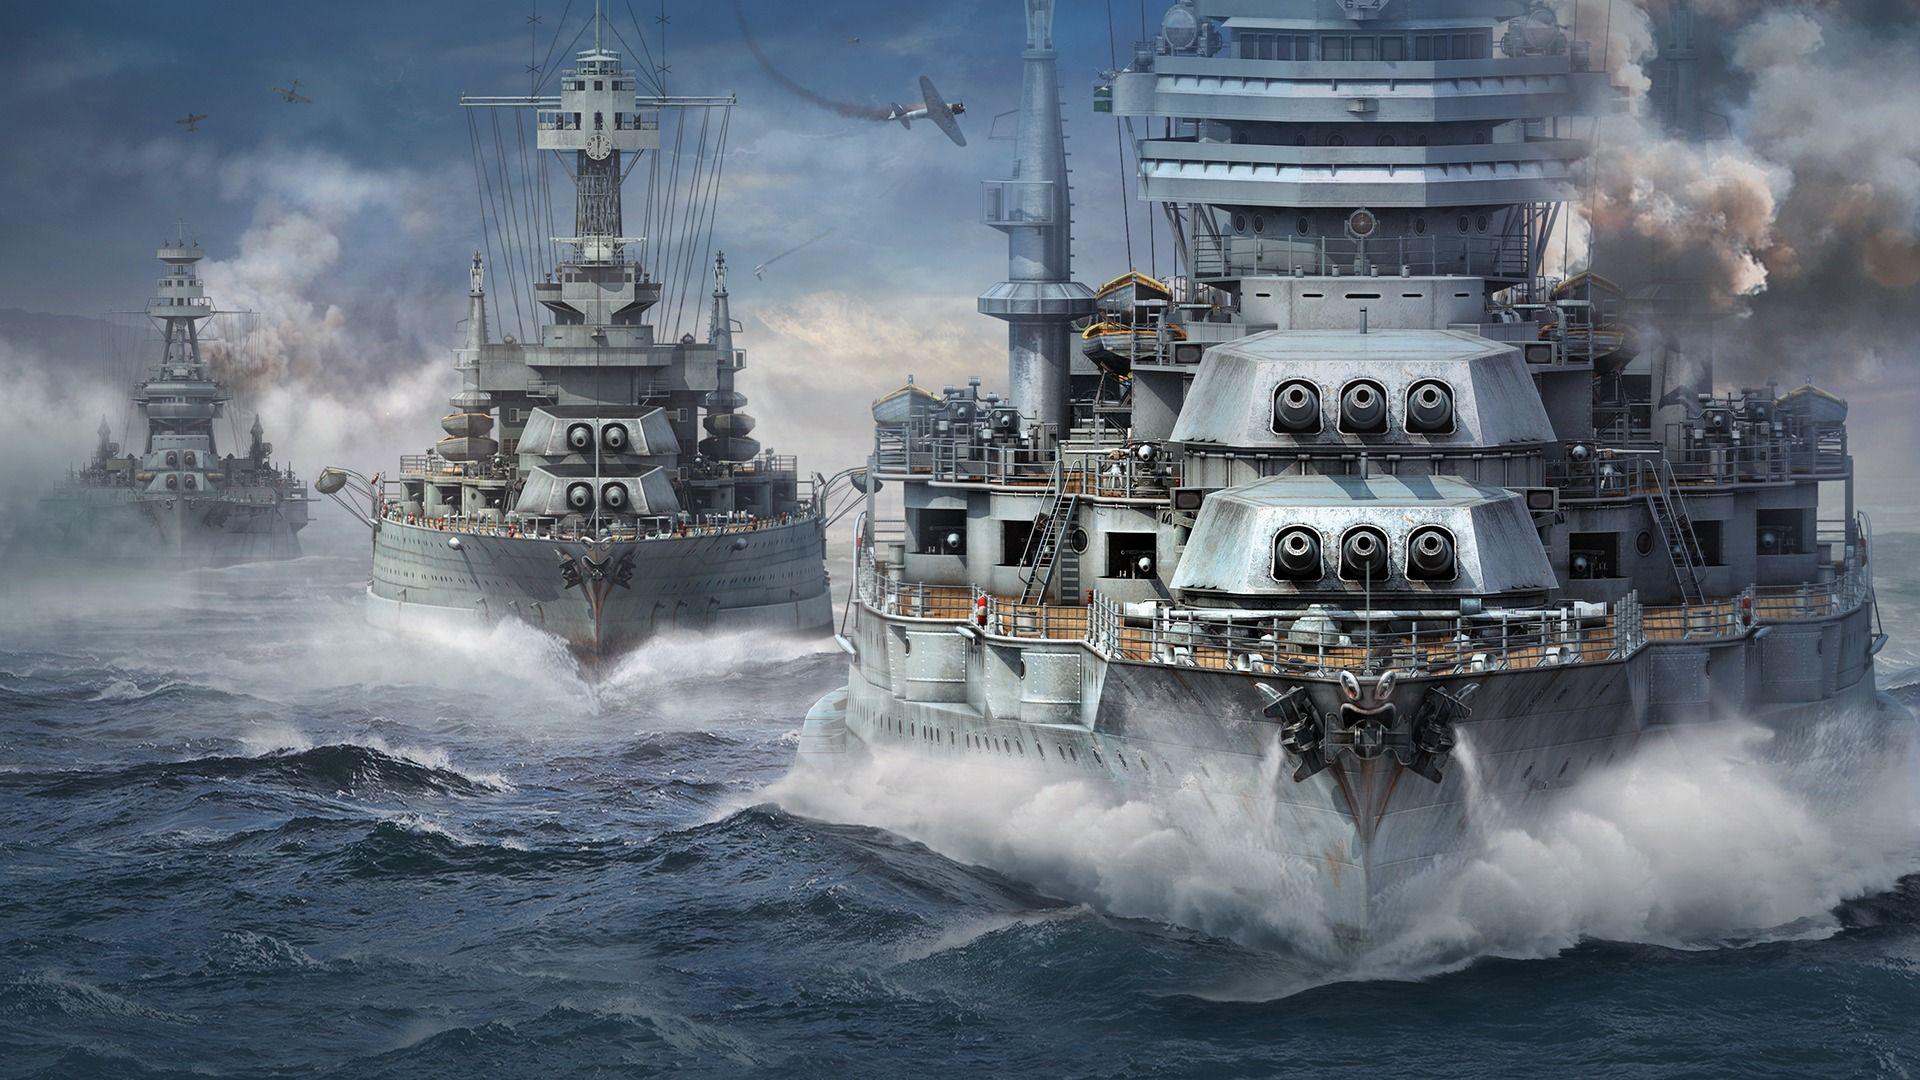 Super Warship for apple download free